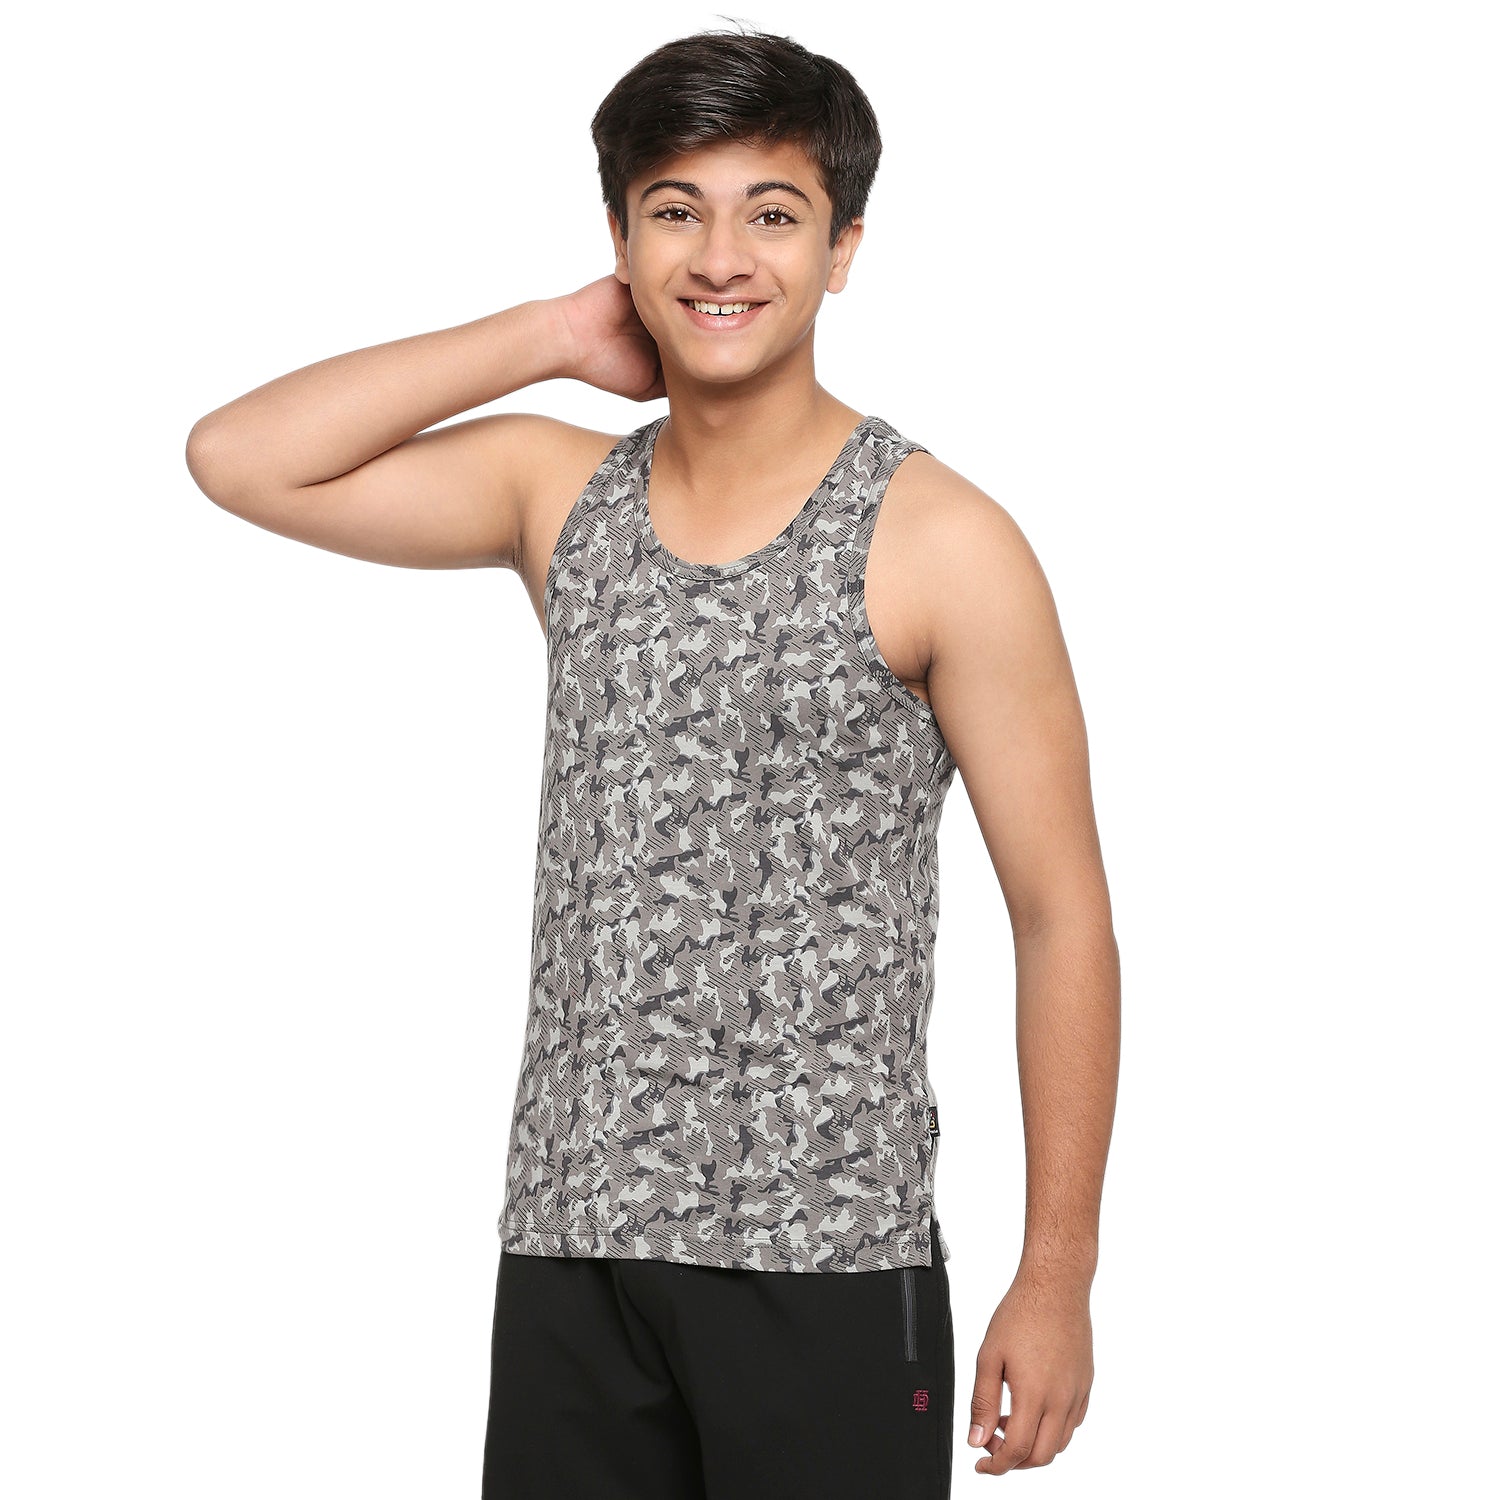 Frenchie U-19 Teens Gray Vest in Camouflage Print